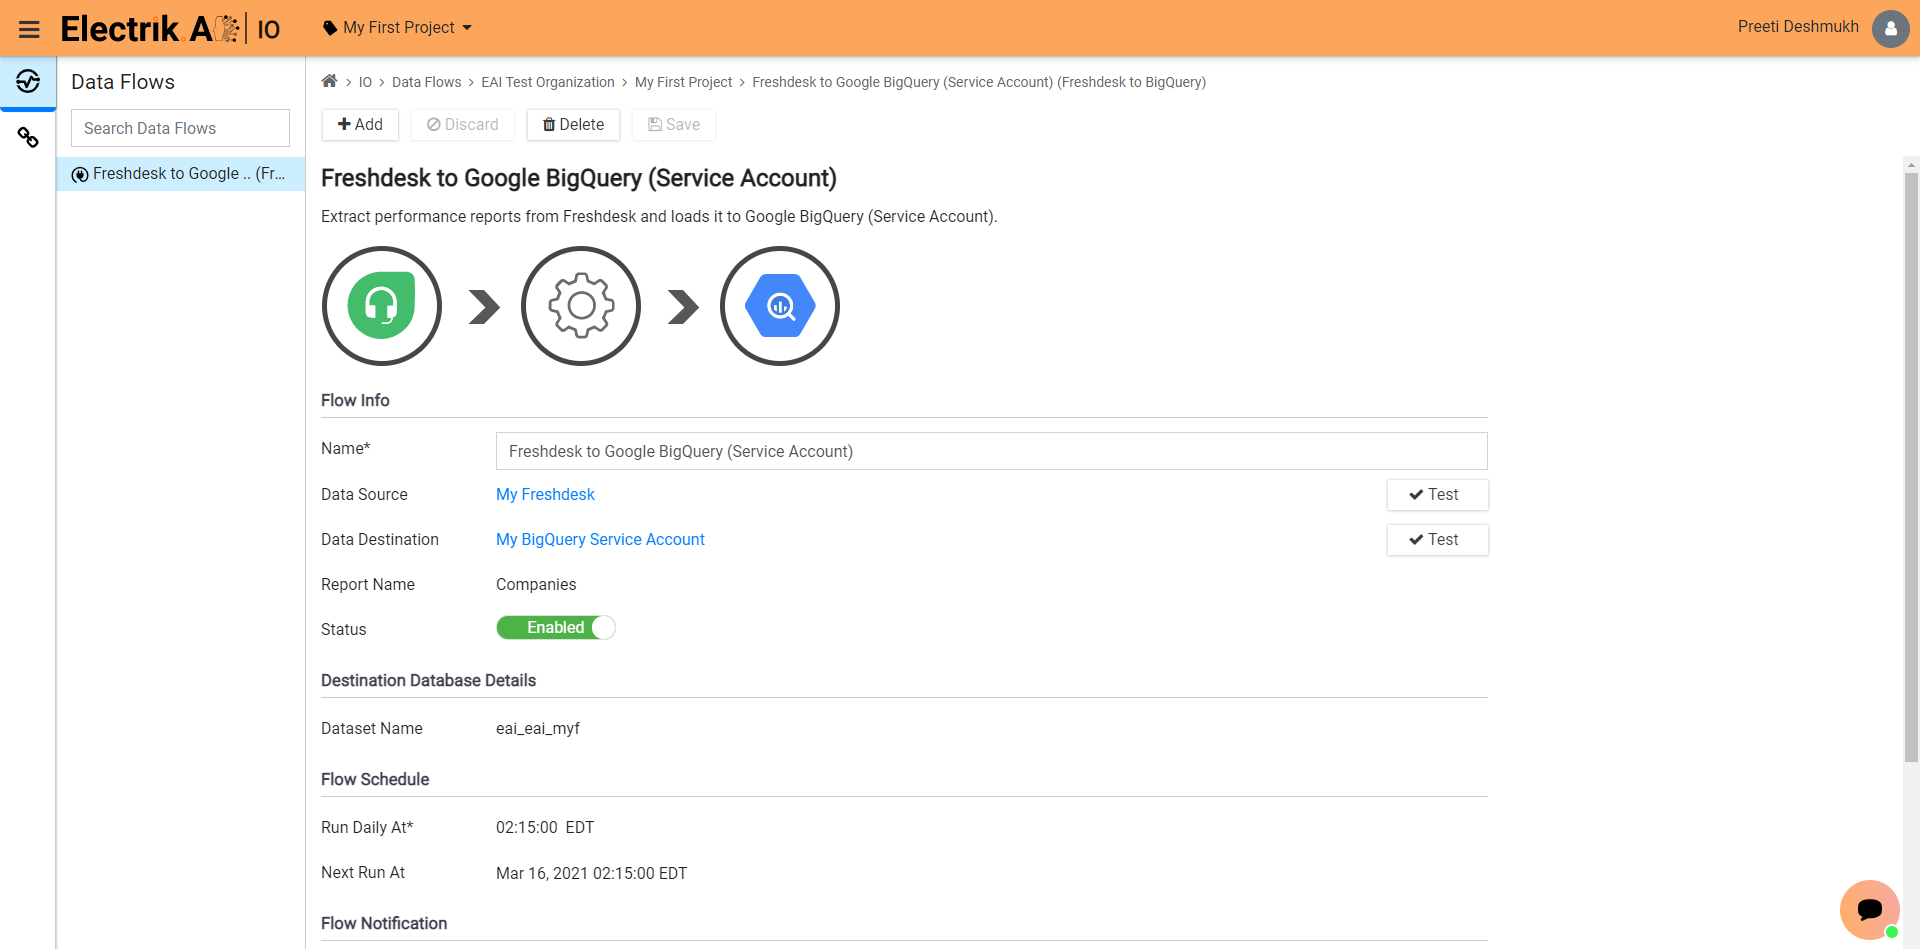 Congratulations, you have now successfully setup Freshdesk Performance Report to BigQuery flow in ElectrikAI